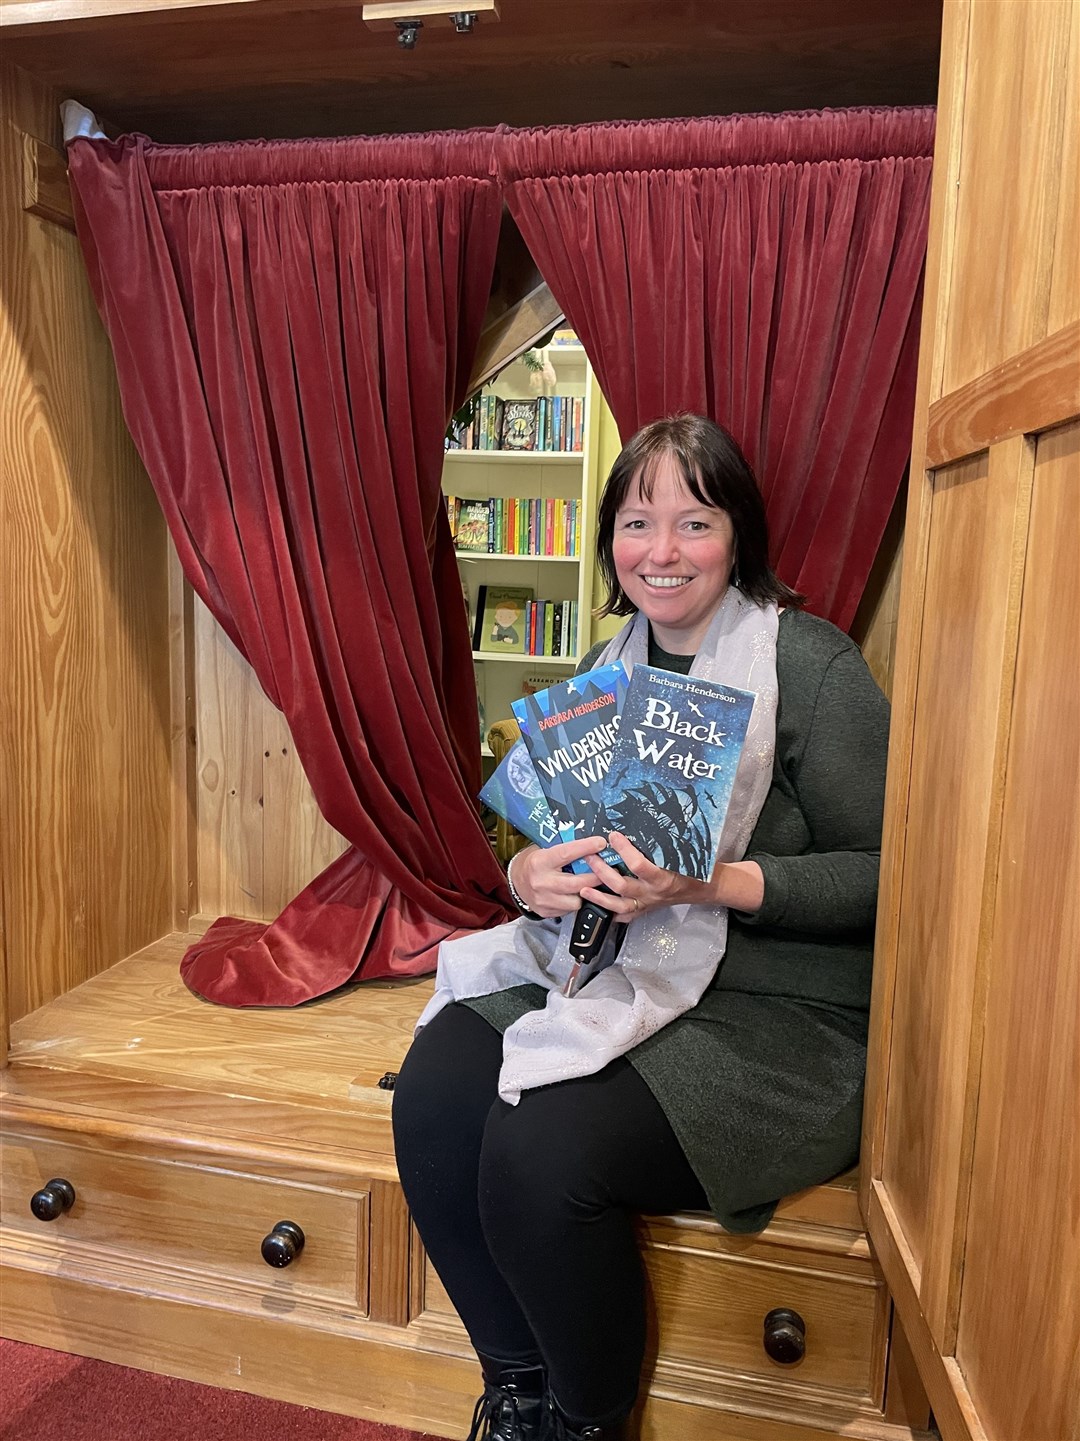 The writer Barbara Henderson on a visit through the wardrobe to the children's bookshop space.